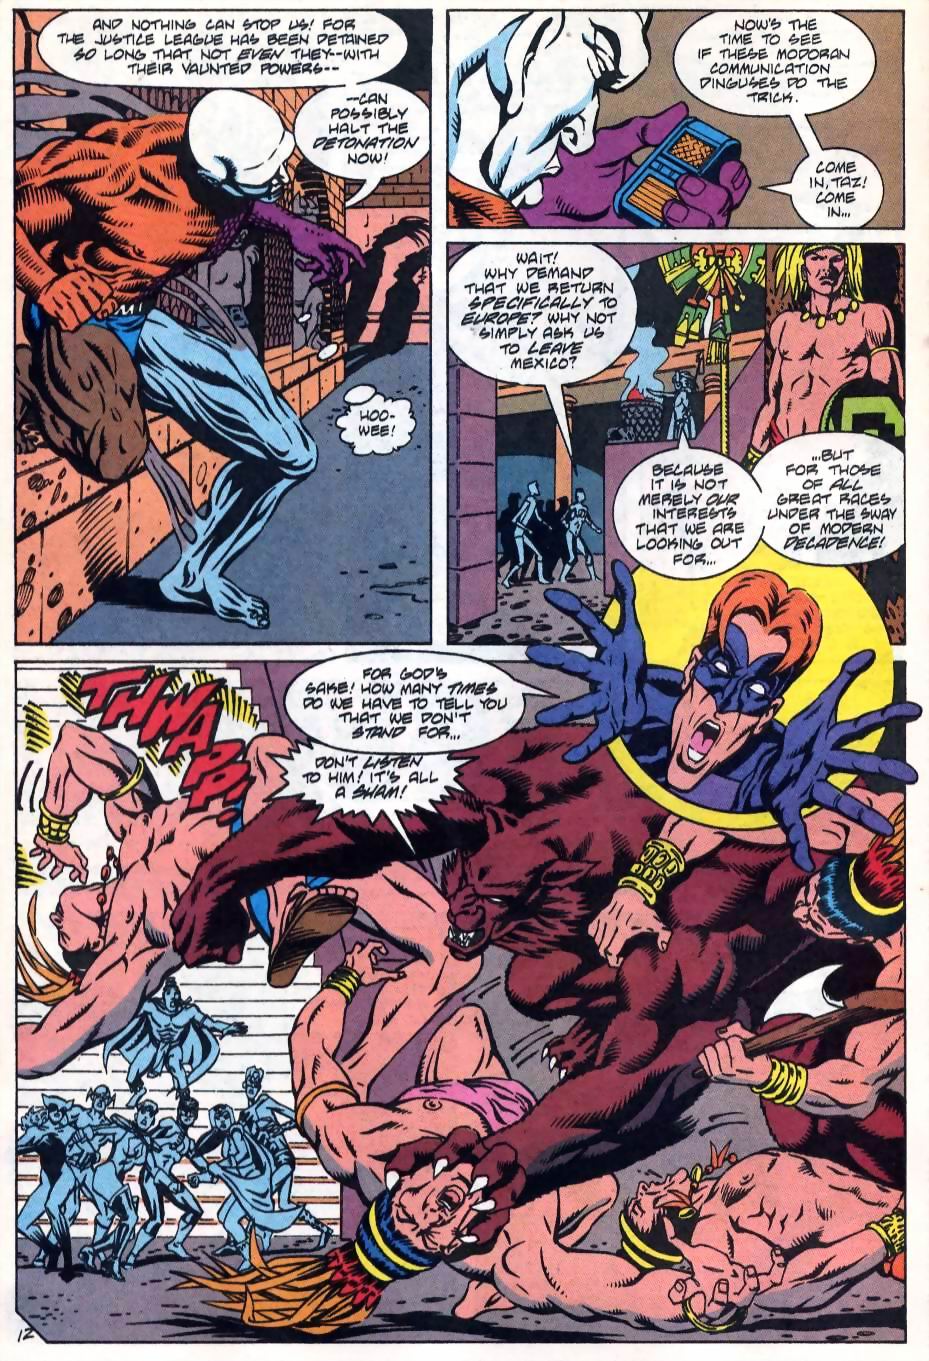 Justice League International (1993) 51 Page 12